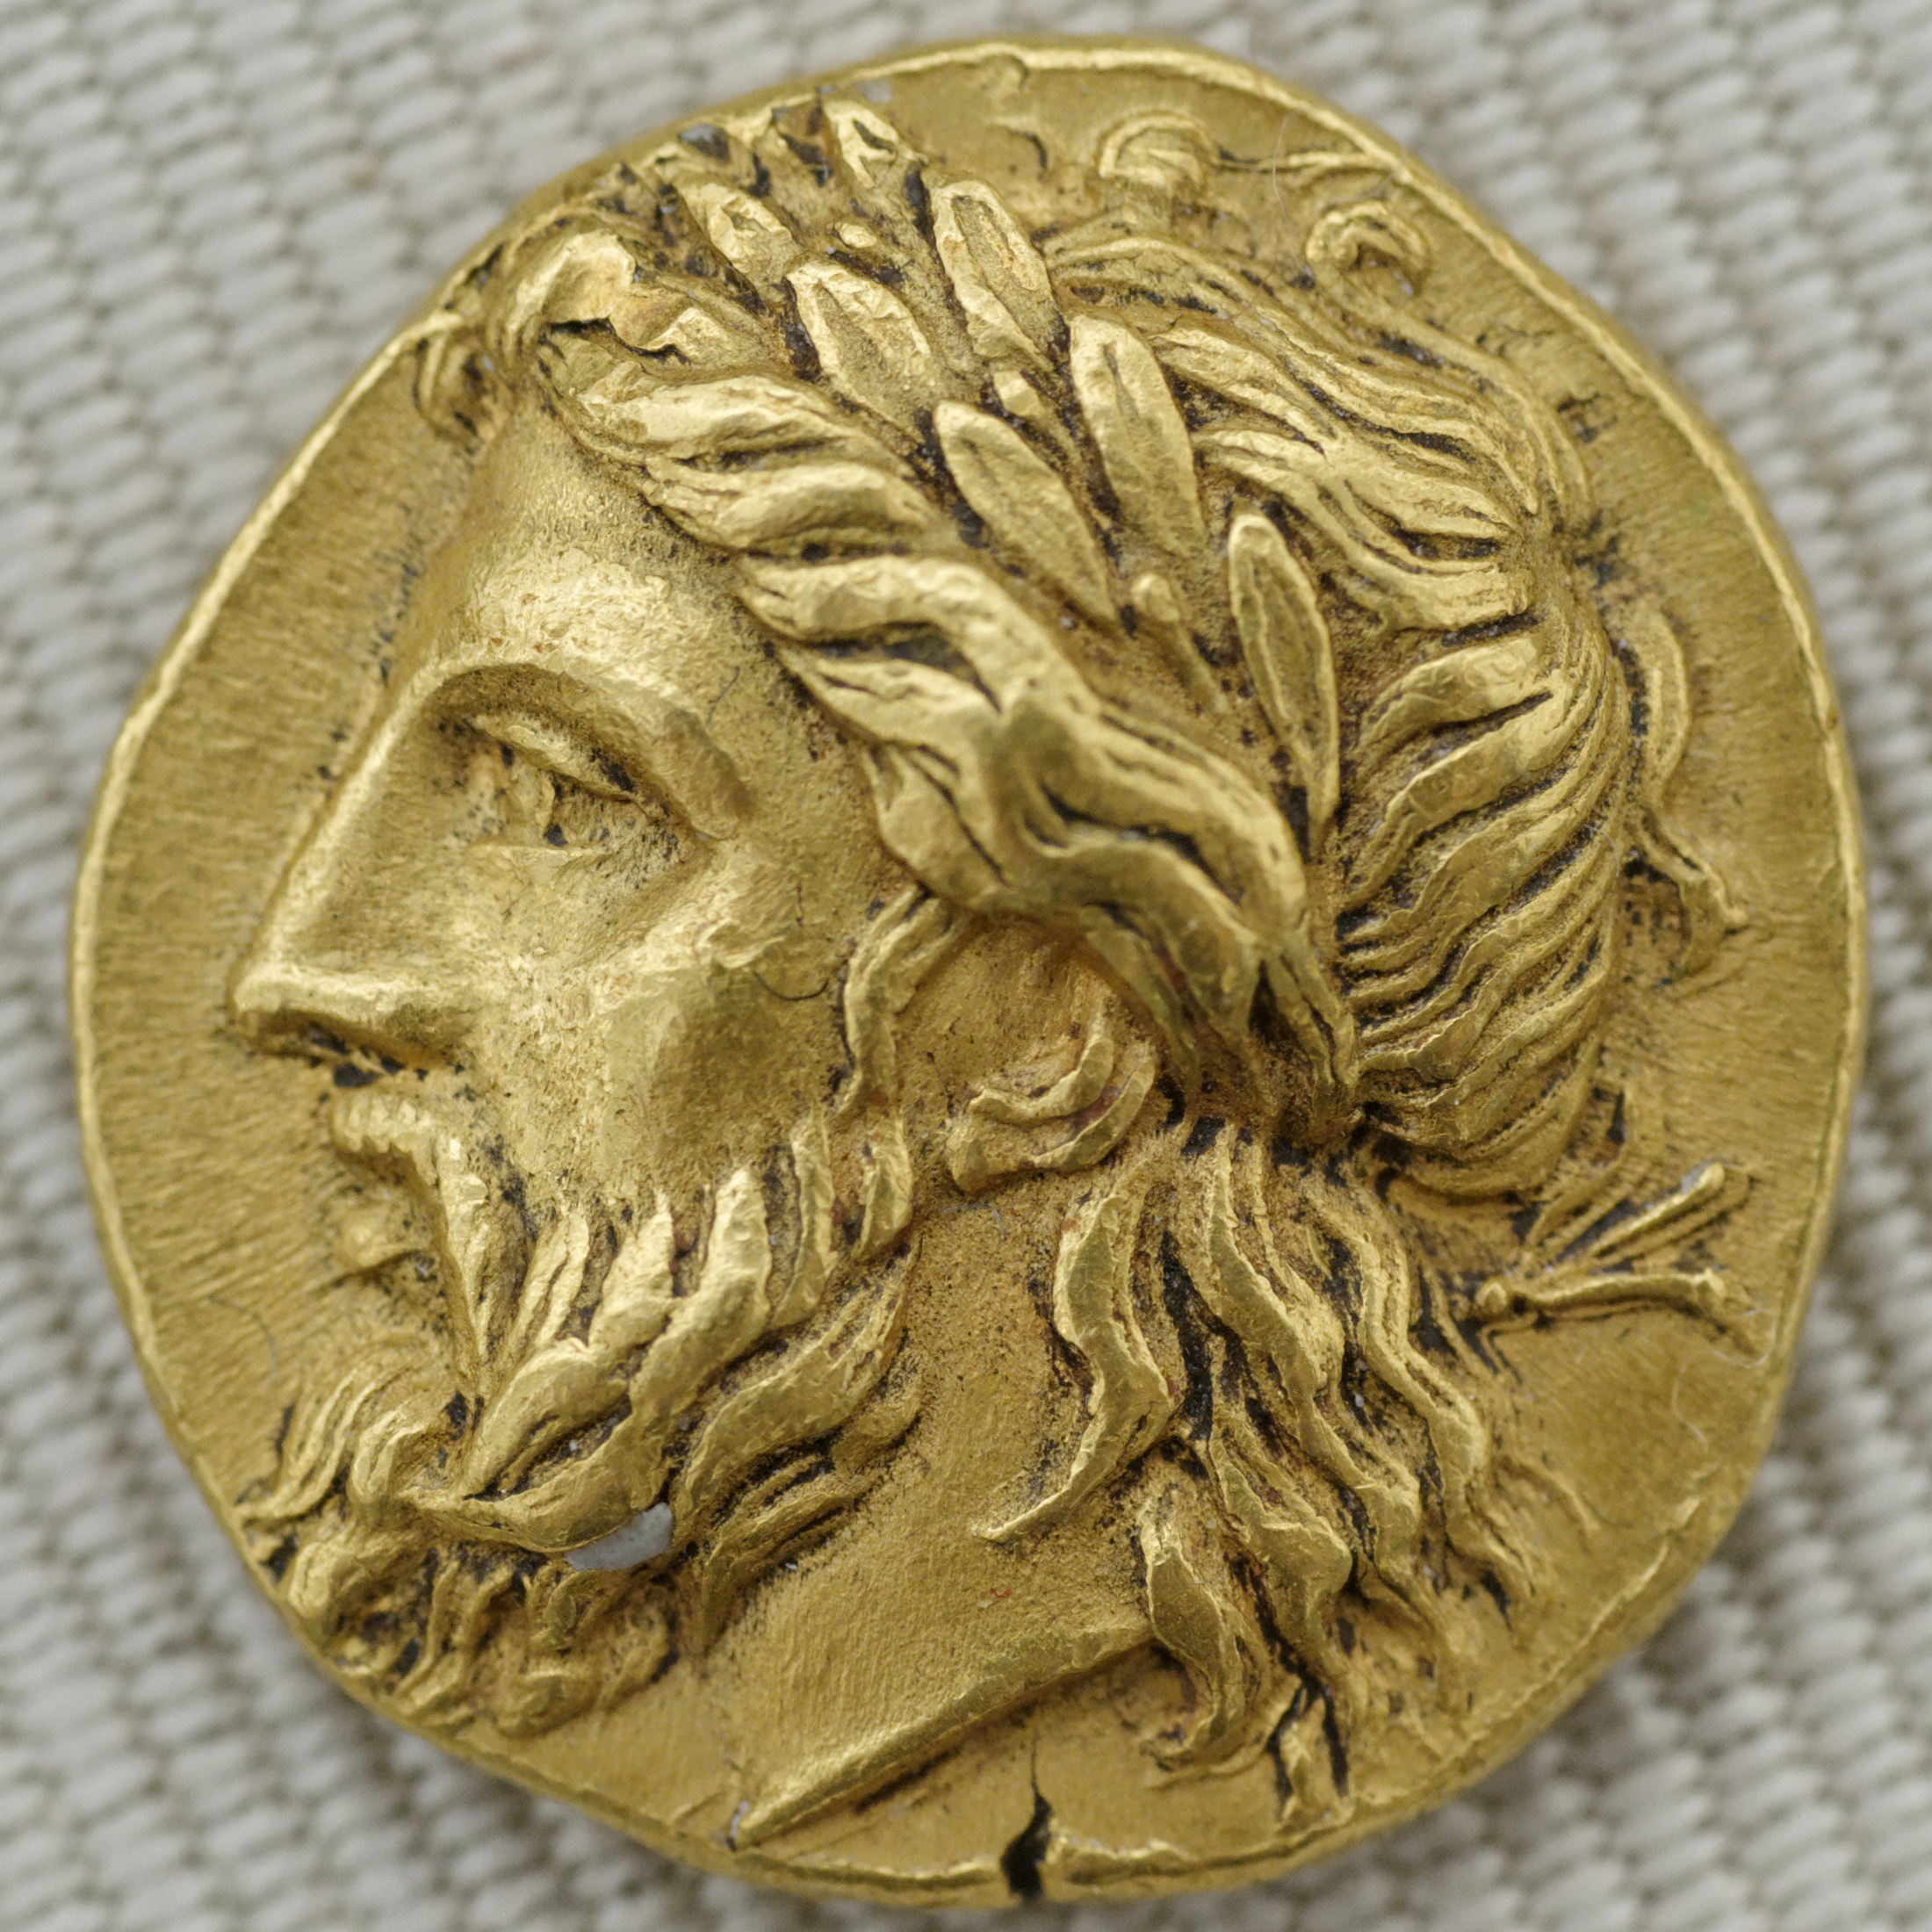 Head of Zeus, bearded and wearing a crown of laurels.